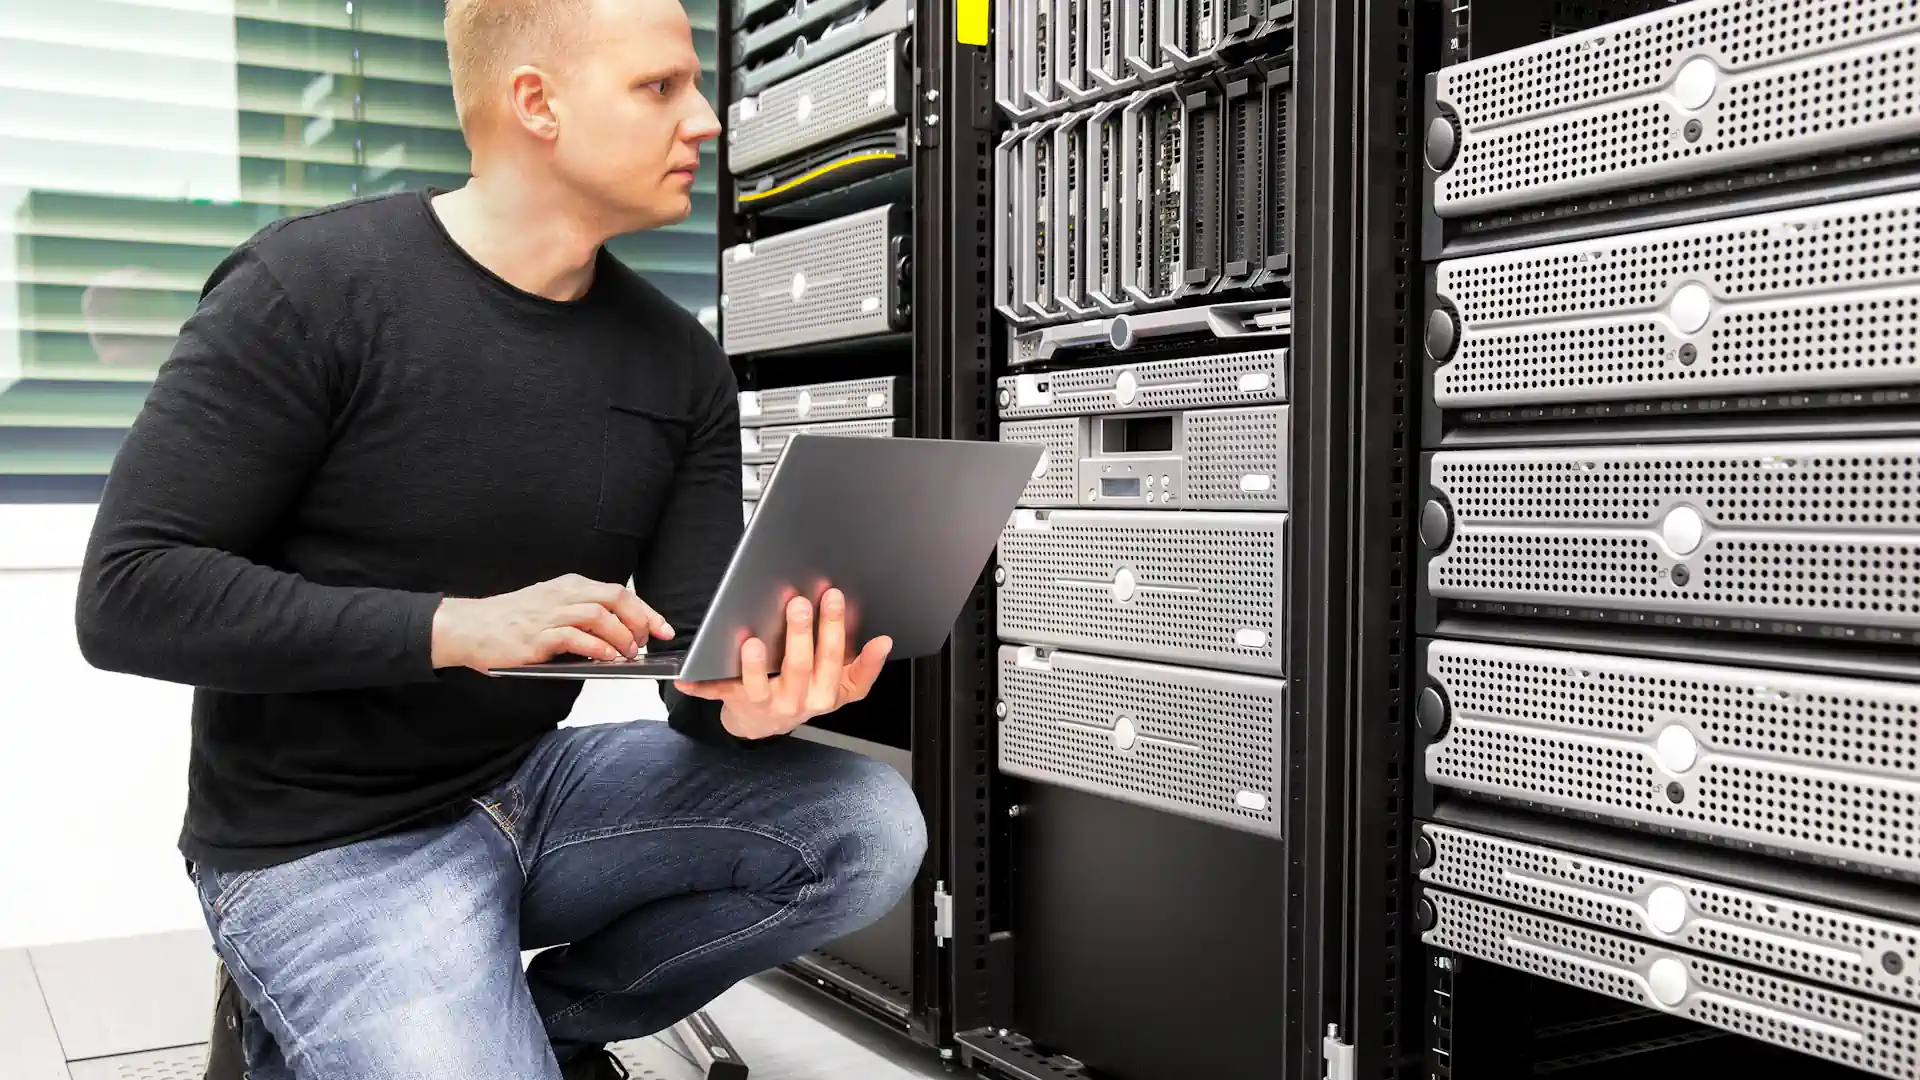 Consultant with laptop monitoring server in datacenter